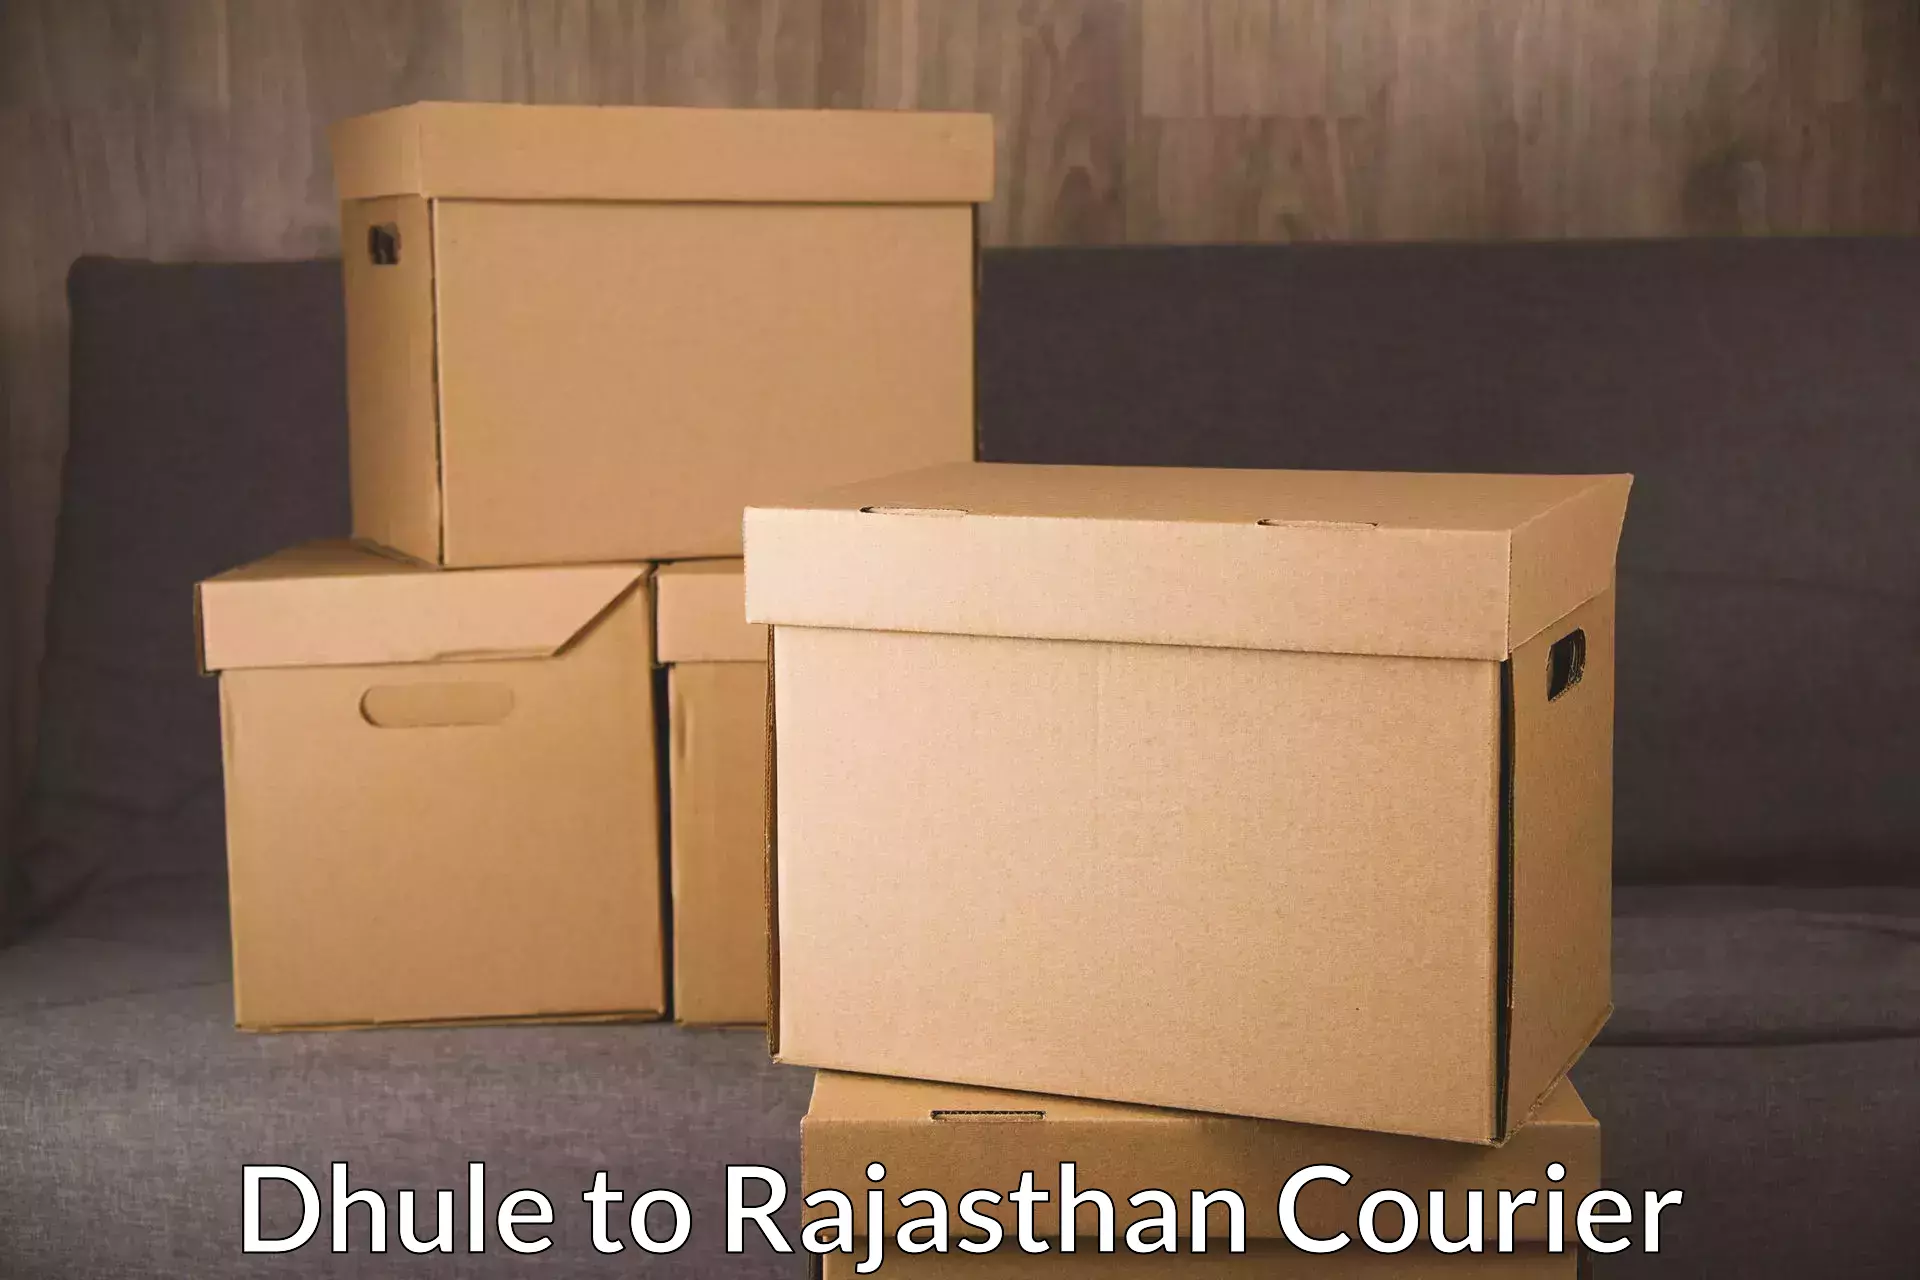 Tech-enabled shipping Dhule to Jaisalmer